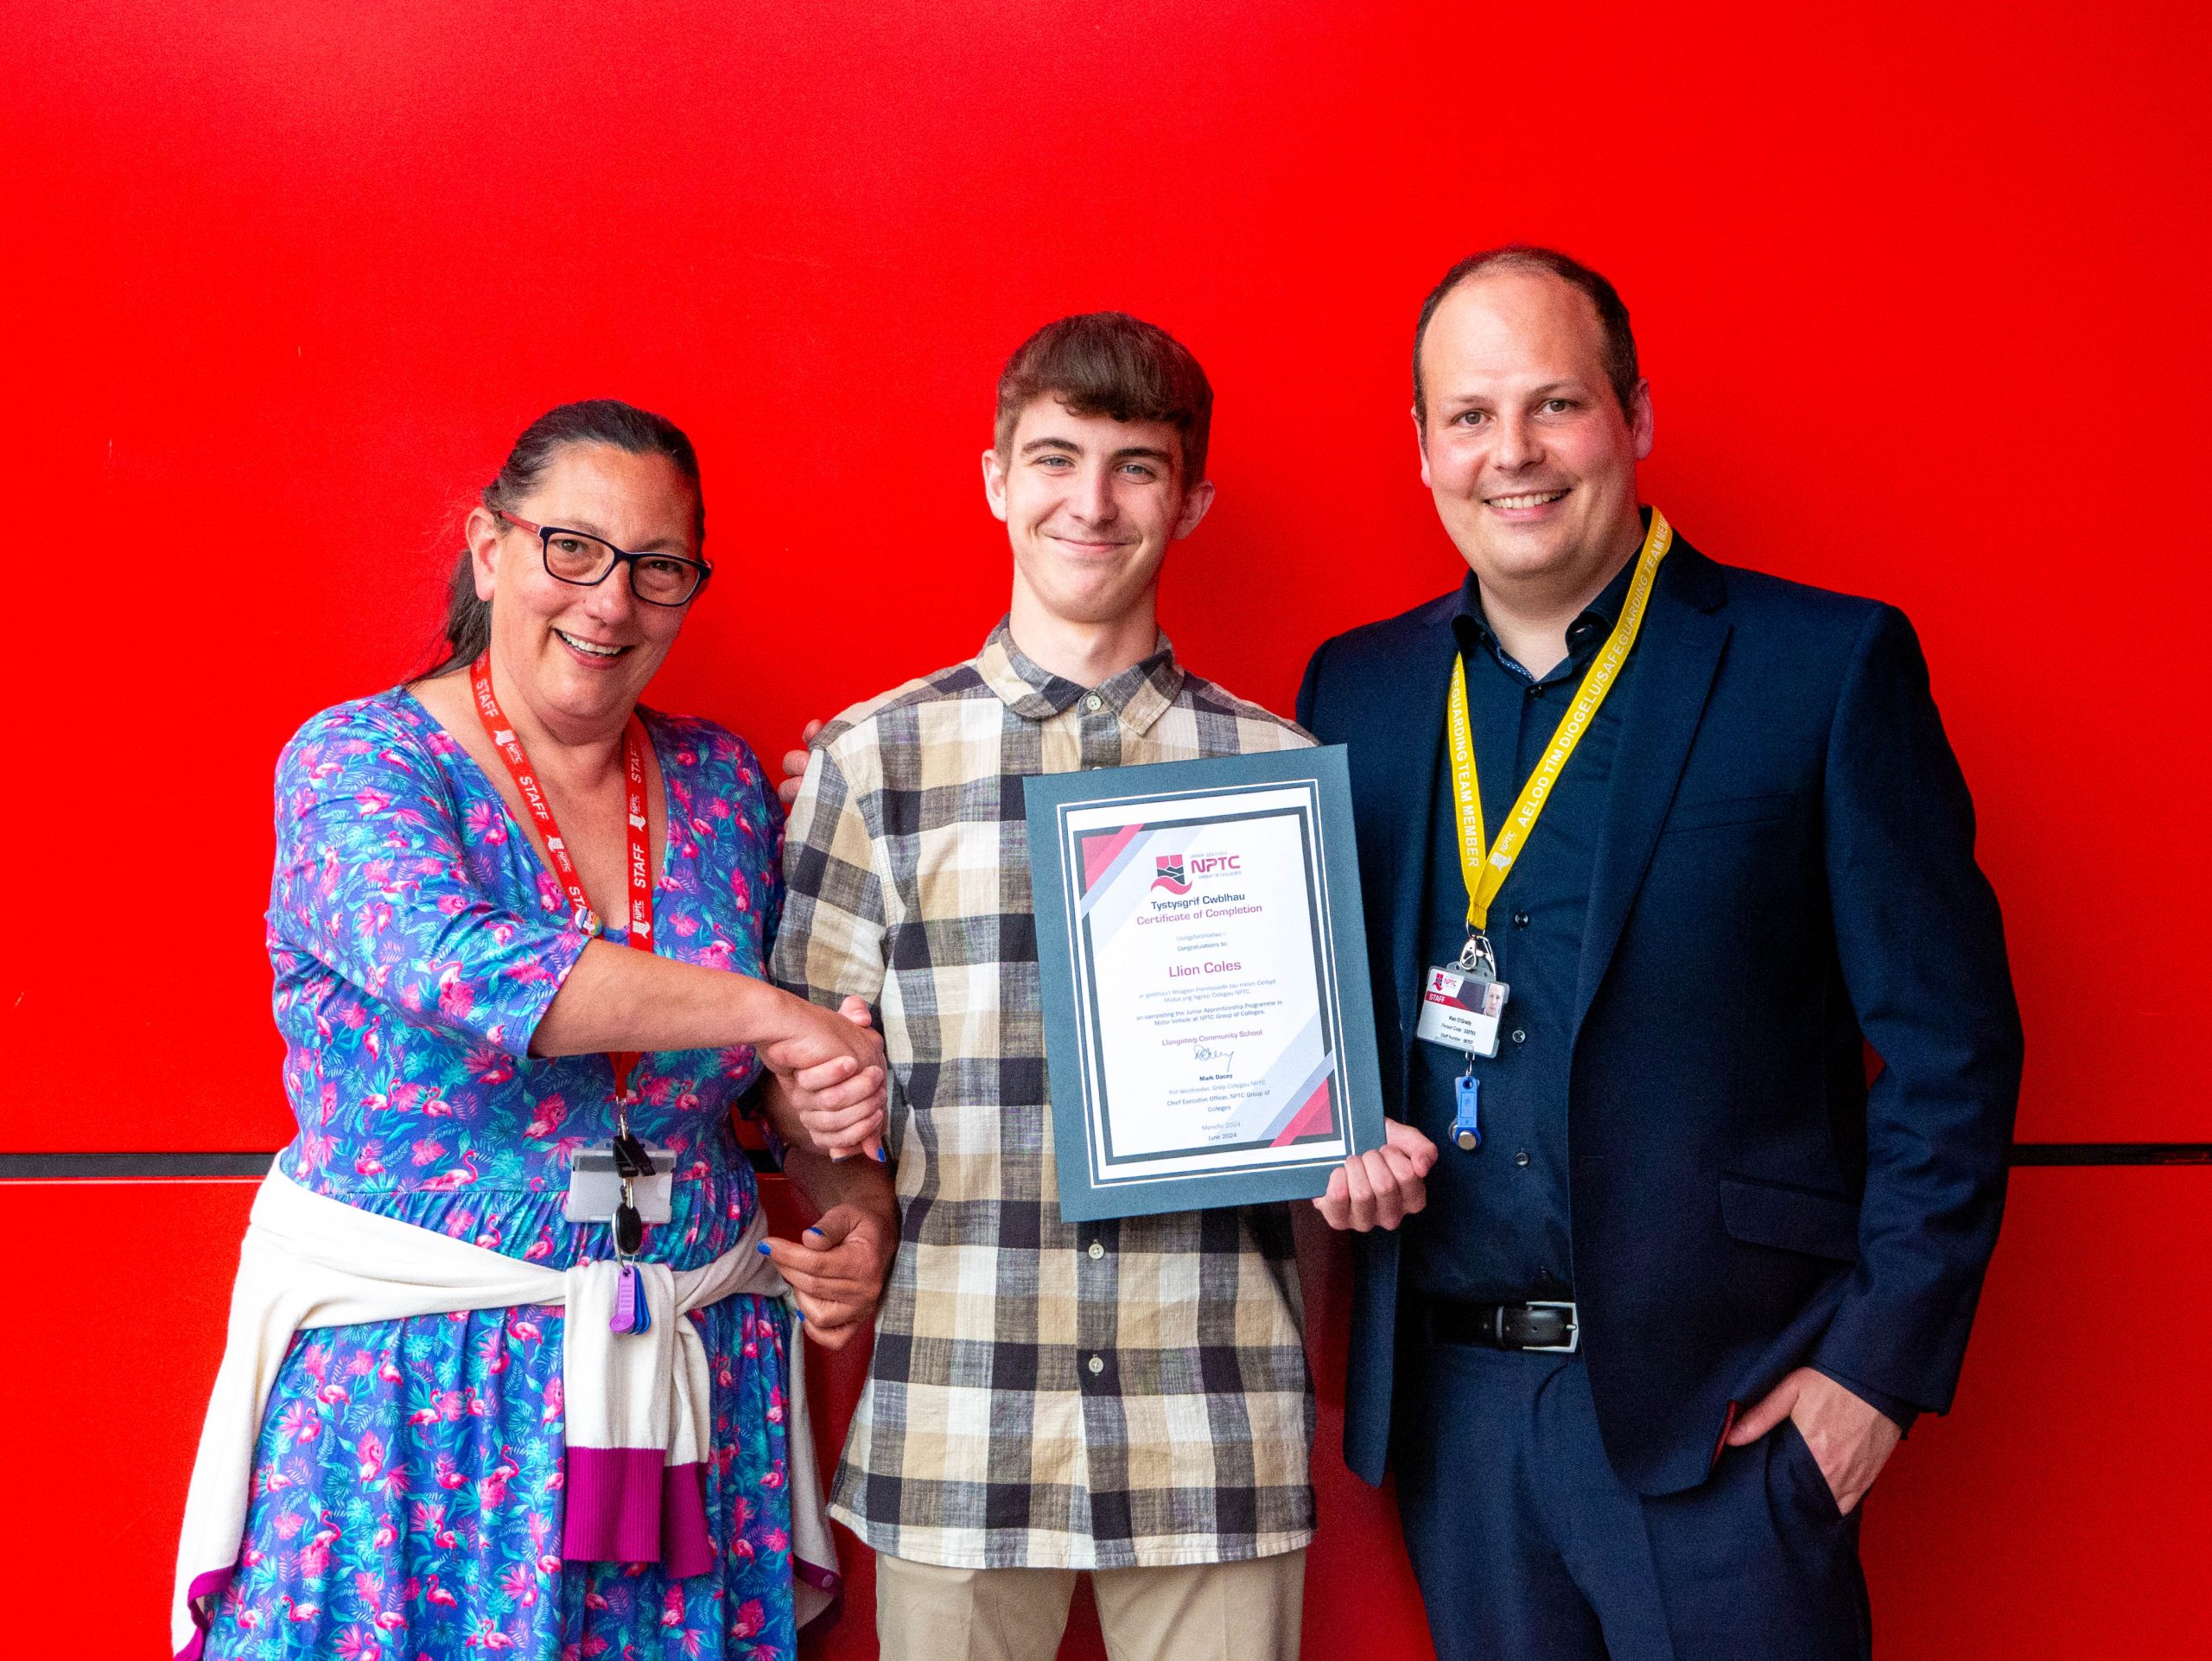 Junior Apprentice with his award congratulated by college staff